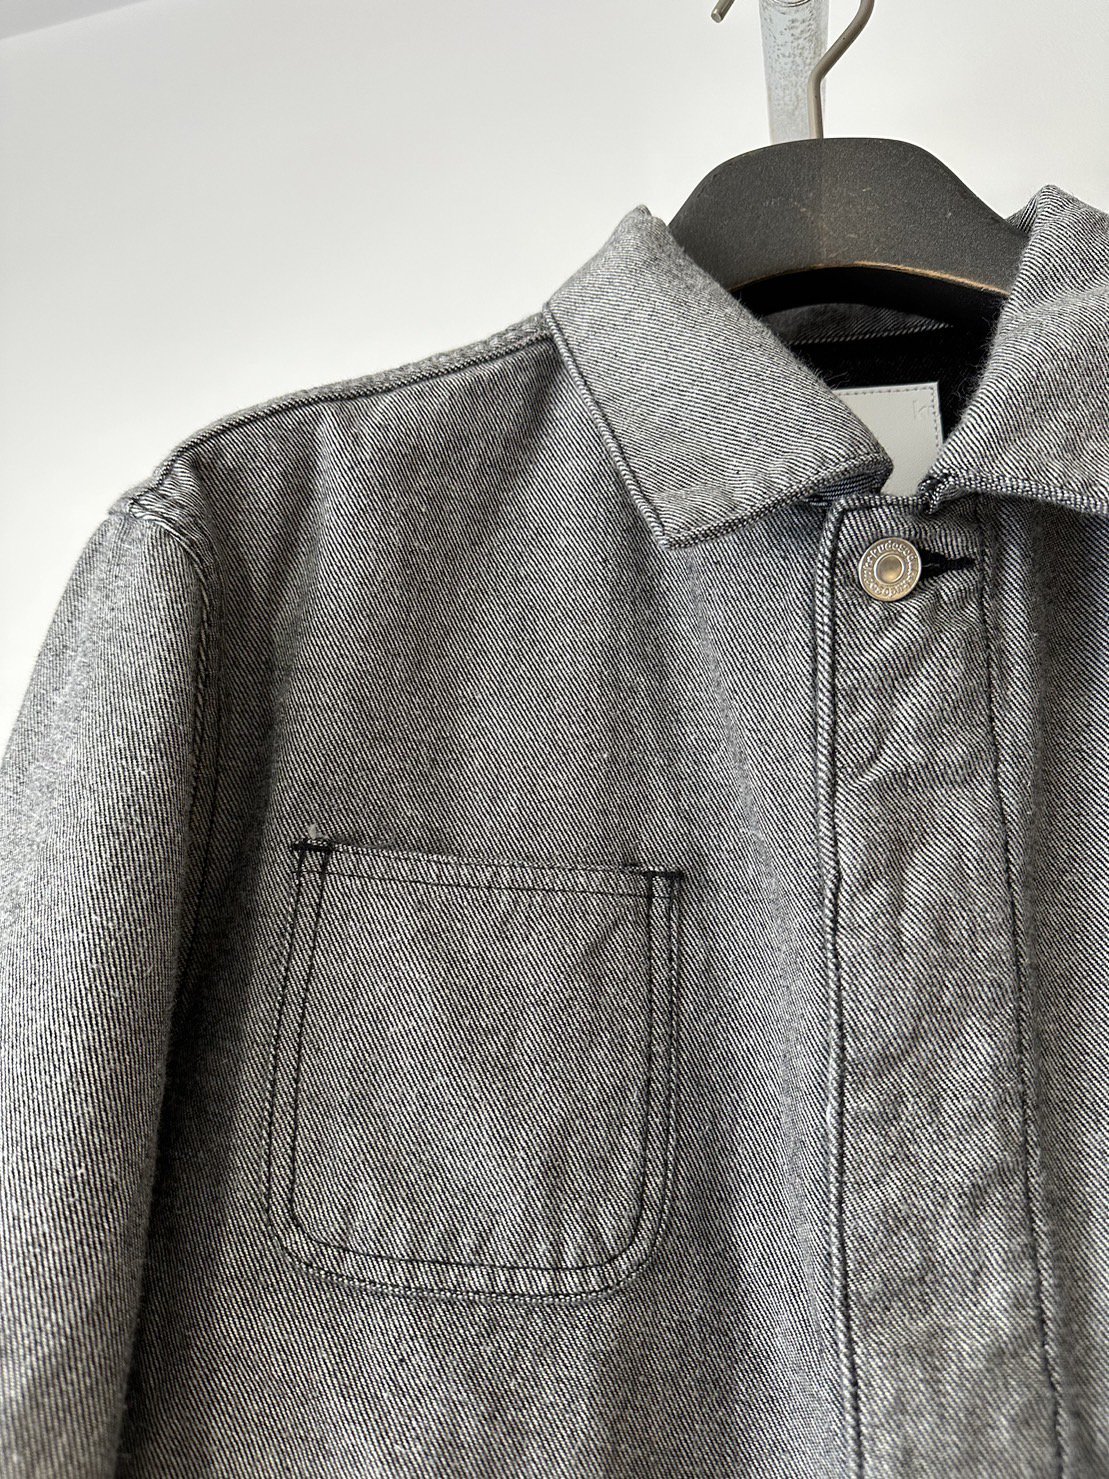 kudos<br />PATCH POCKET DENIM JACKET / GRAY<img class='new_mark_img2' src='https://img.shop-pro.jp/img/new/icons14.gif' style='border:none;display:inline;margin:0px;padding:0px;width:auto;' />